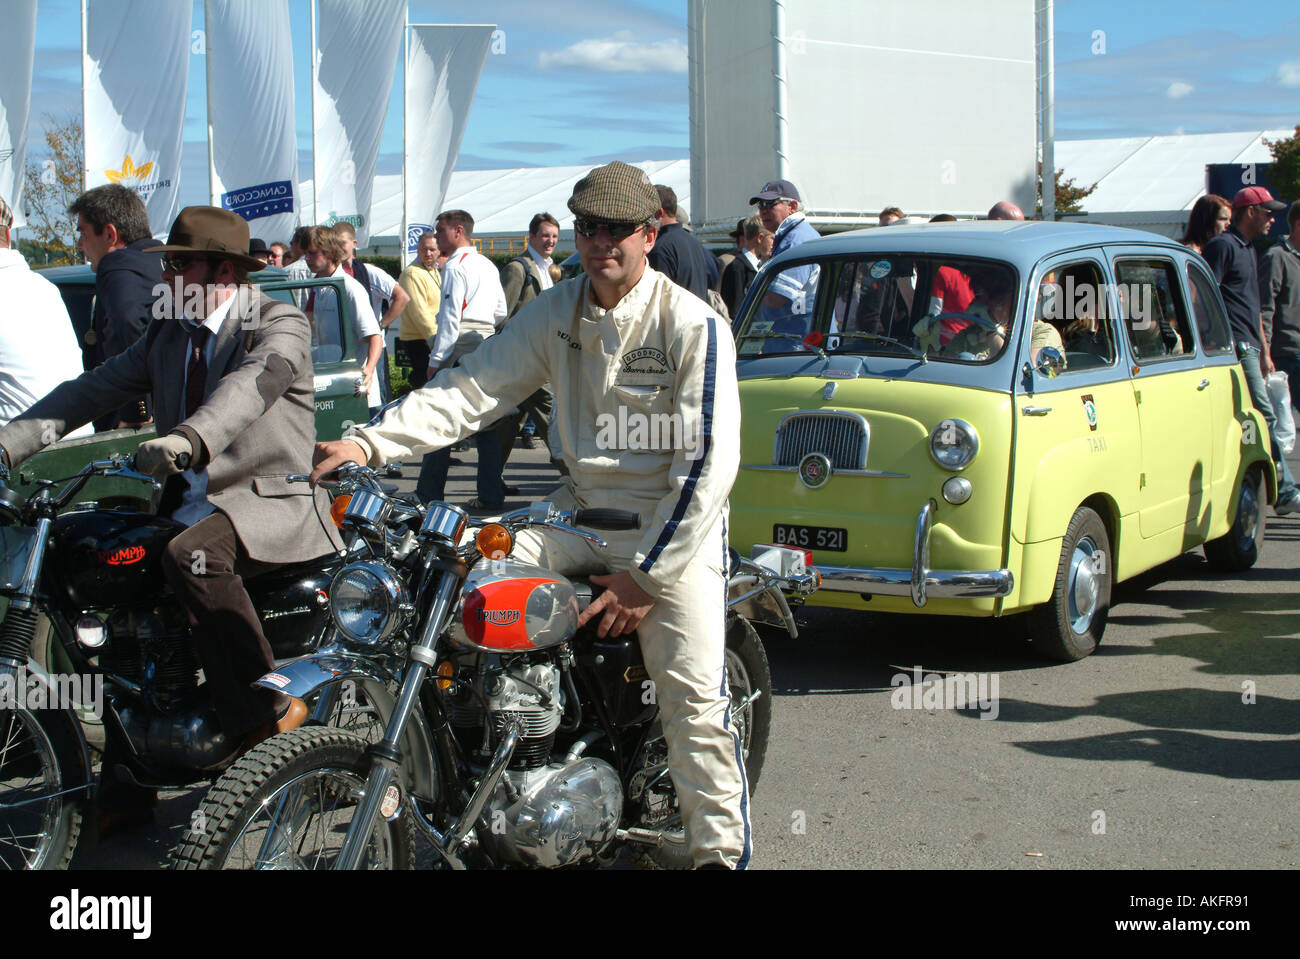 Old Triumph Motorbikes and Fiat Taxi at Goodwood Revival Meeting 2005 Stock Photo